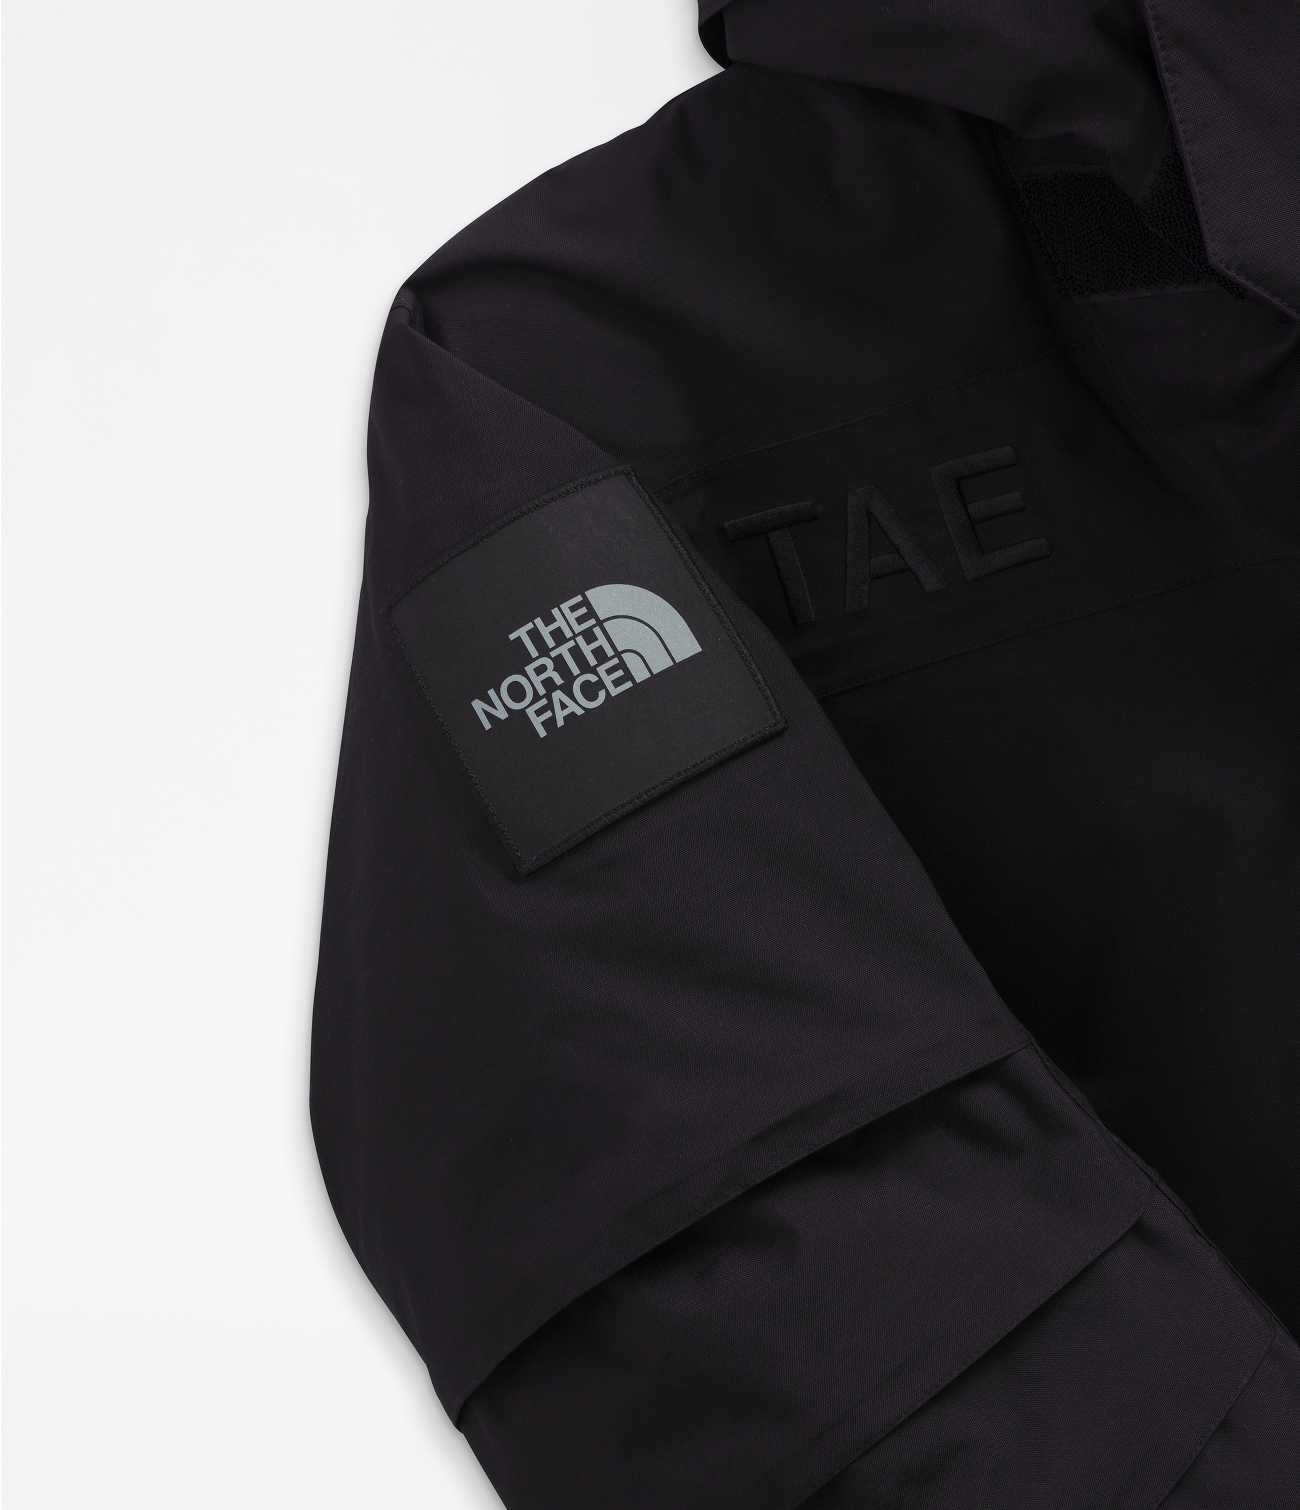 MEN'S TRANS-ANTARCTIC EXPEDITION PARKA | The North Face | The 